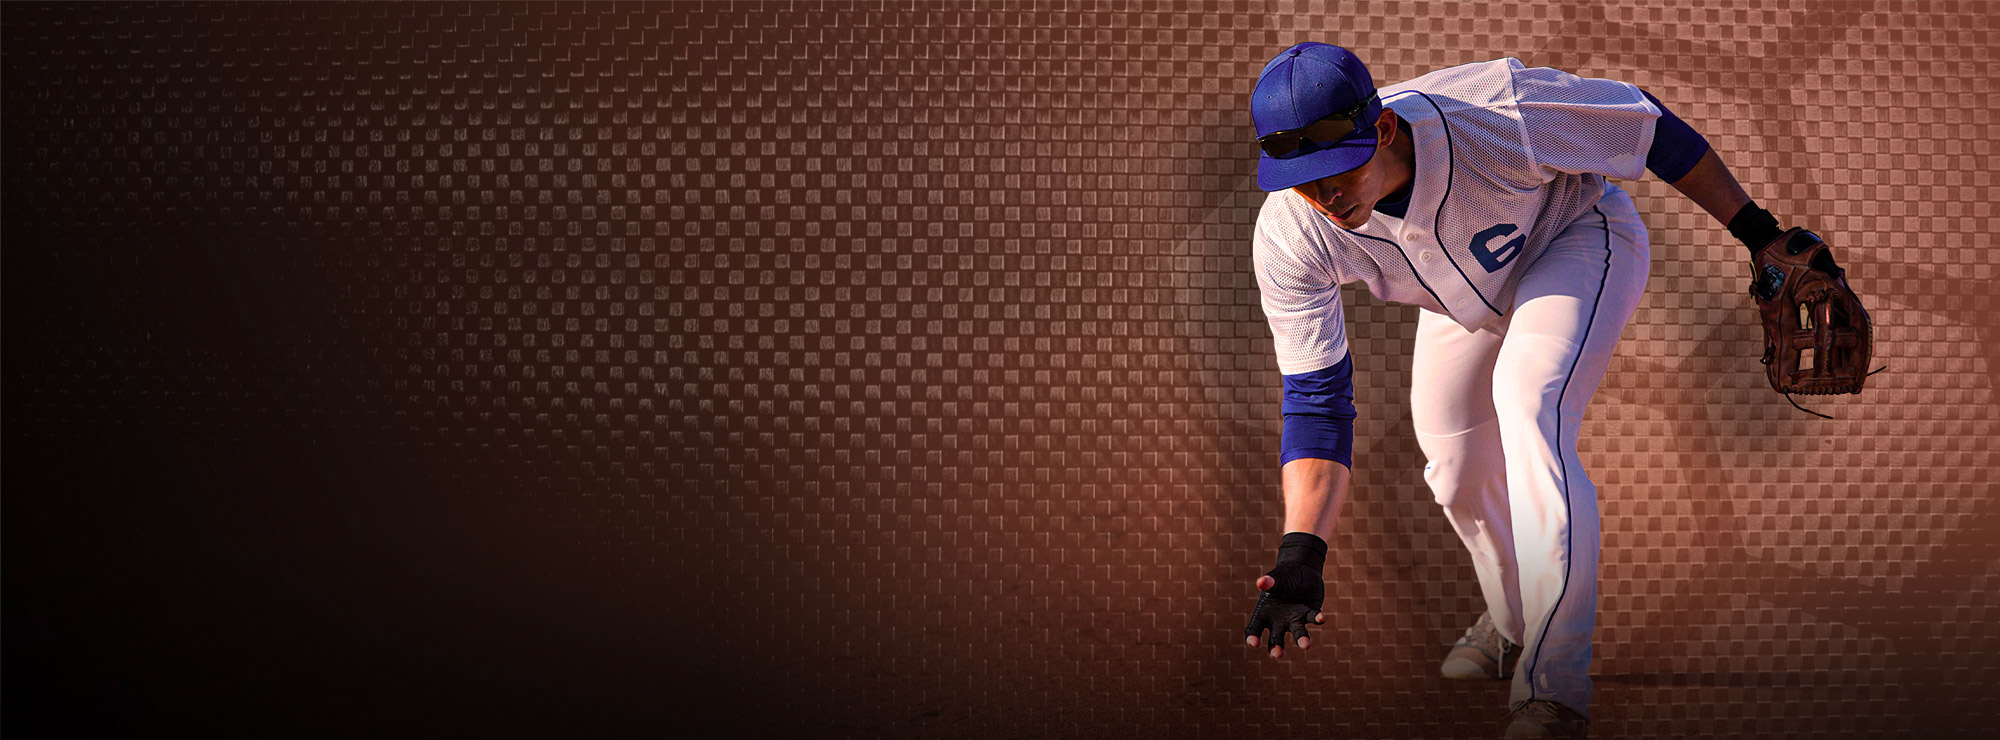 Baseball player Copper Fit®